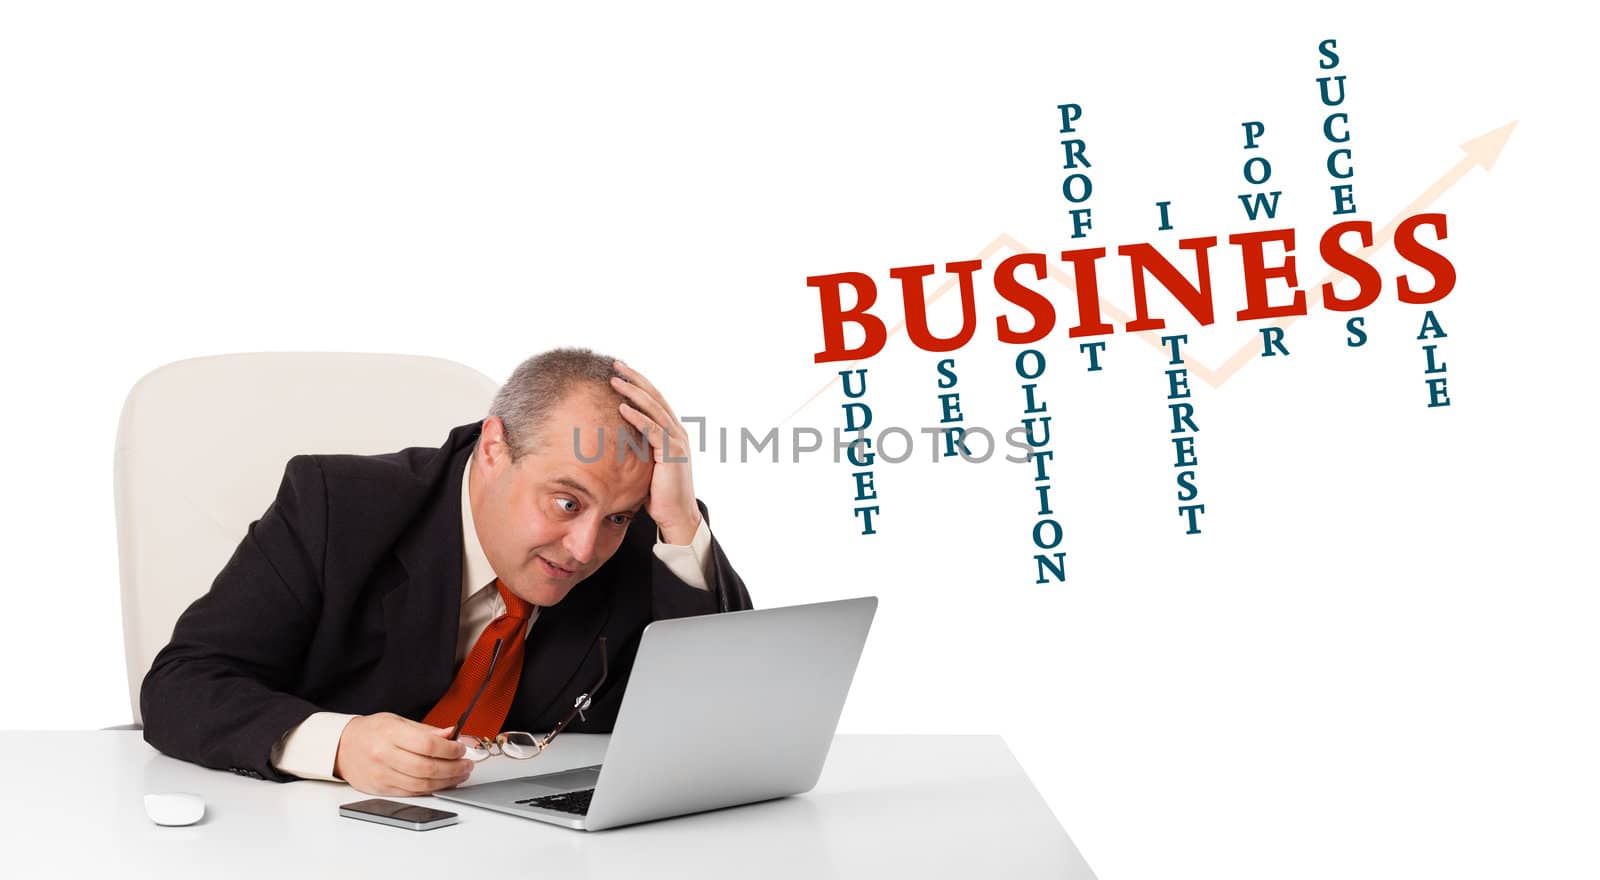 bisinessman sitting at desk and looking laptop with business word cloud, isolated on white